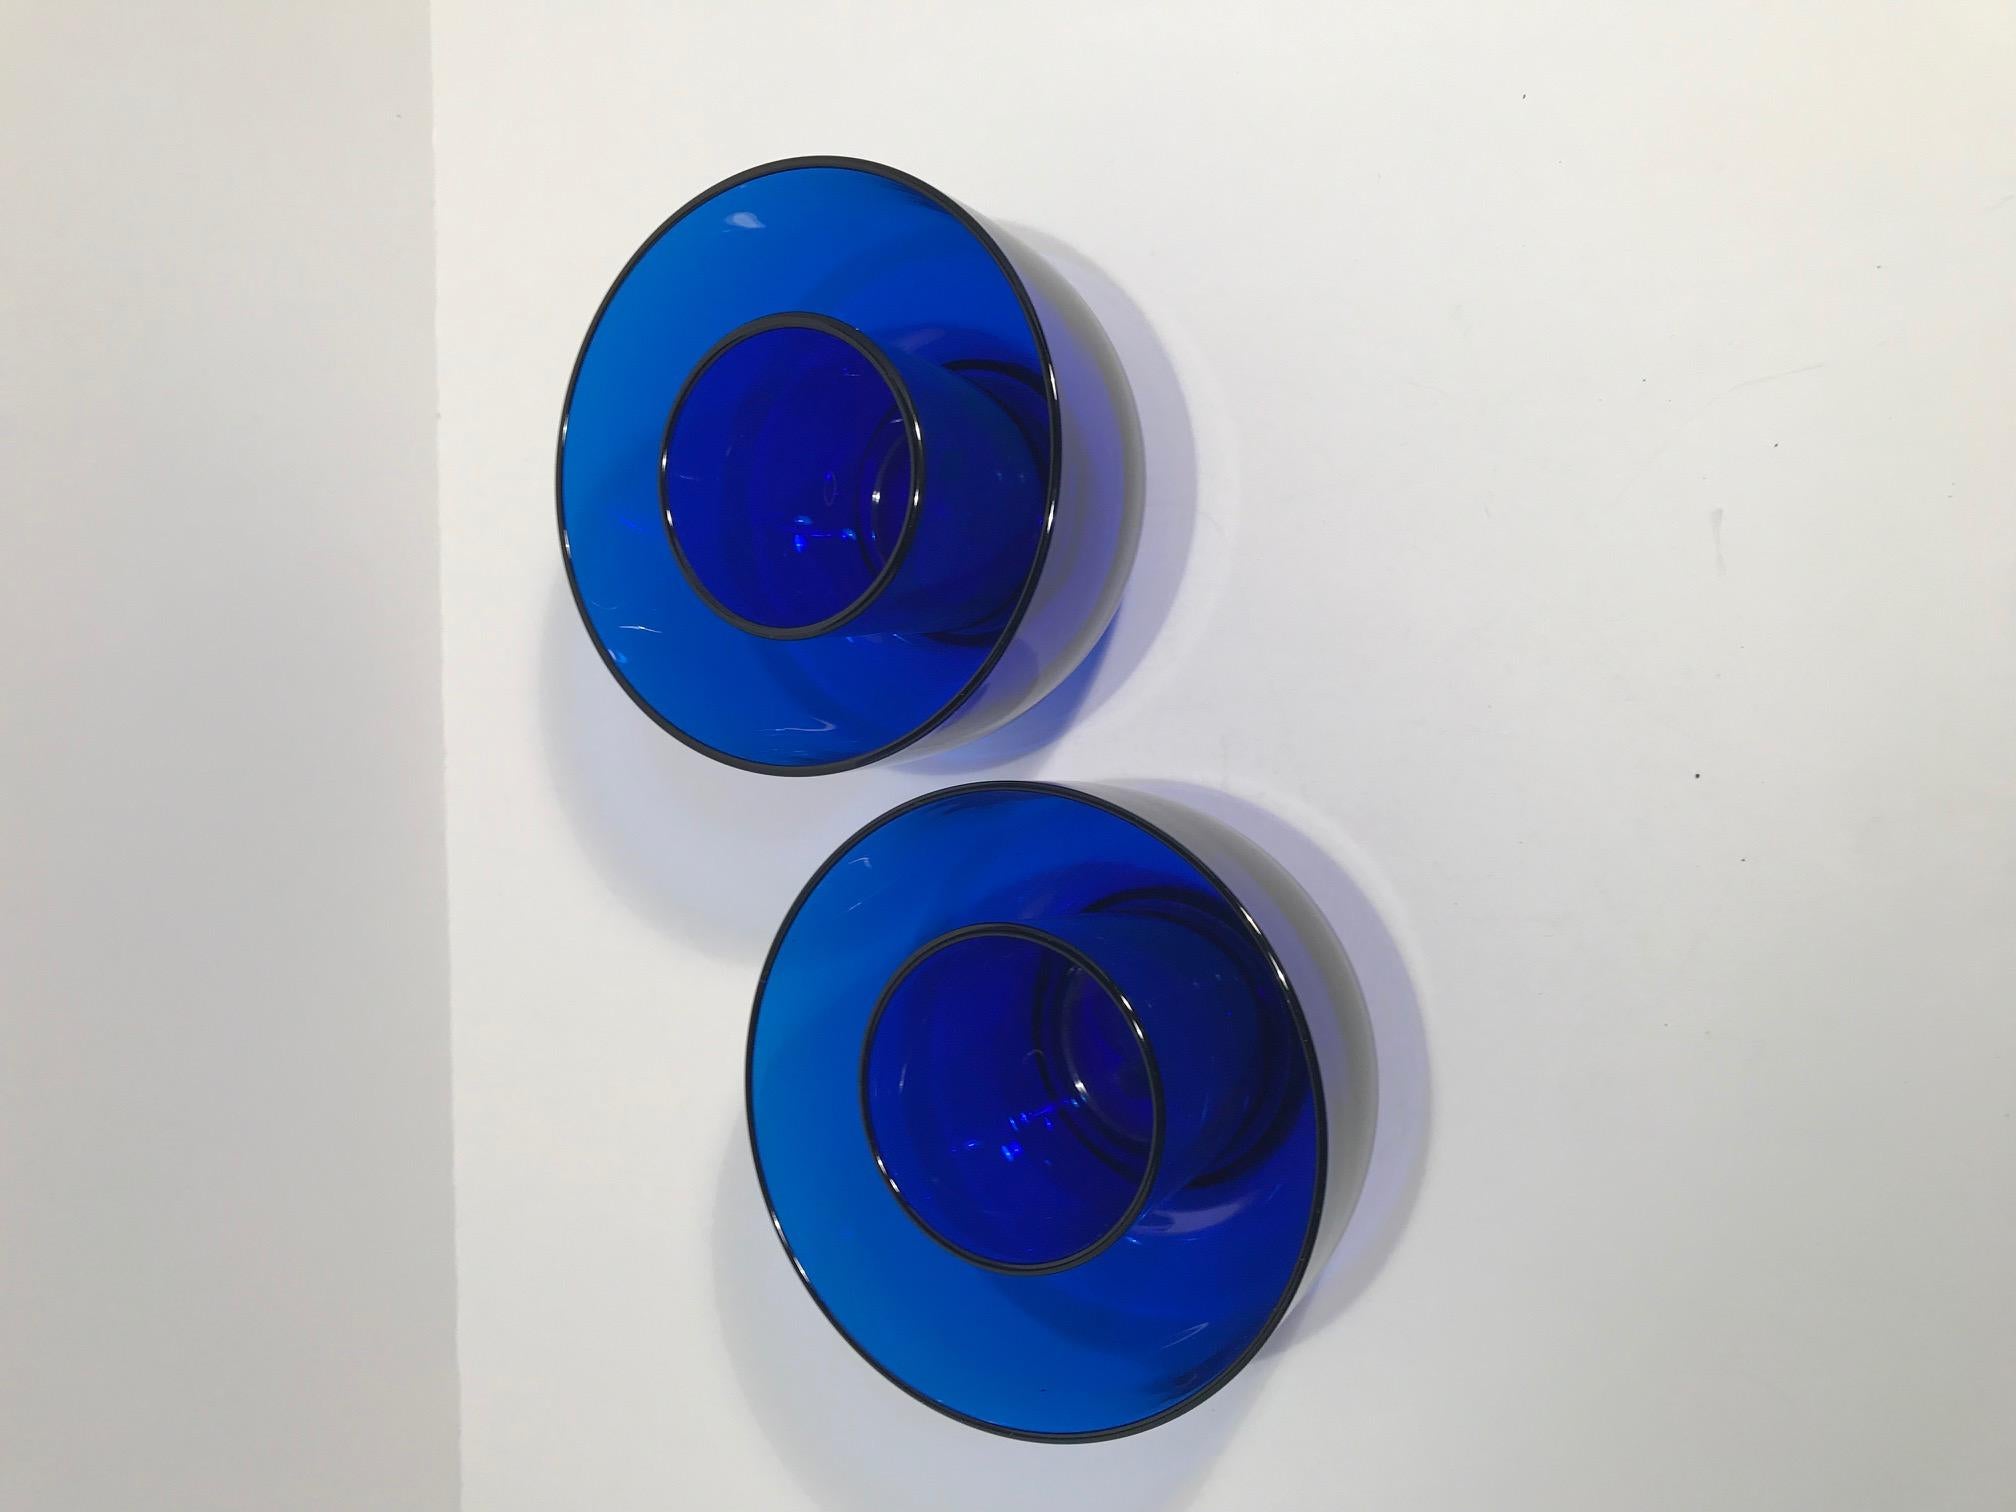 Pair of marked Baccarat cobalt blue chilling bowls. The pair of bowls was originally part of a set of twelve. I imagine the bowl by itself was used as a finger bowl, however, by adding the insert you could turn this pair into a chiller. The bottoms